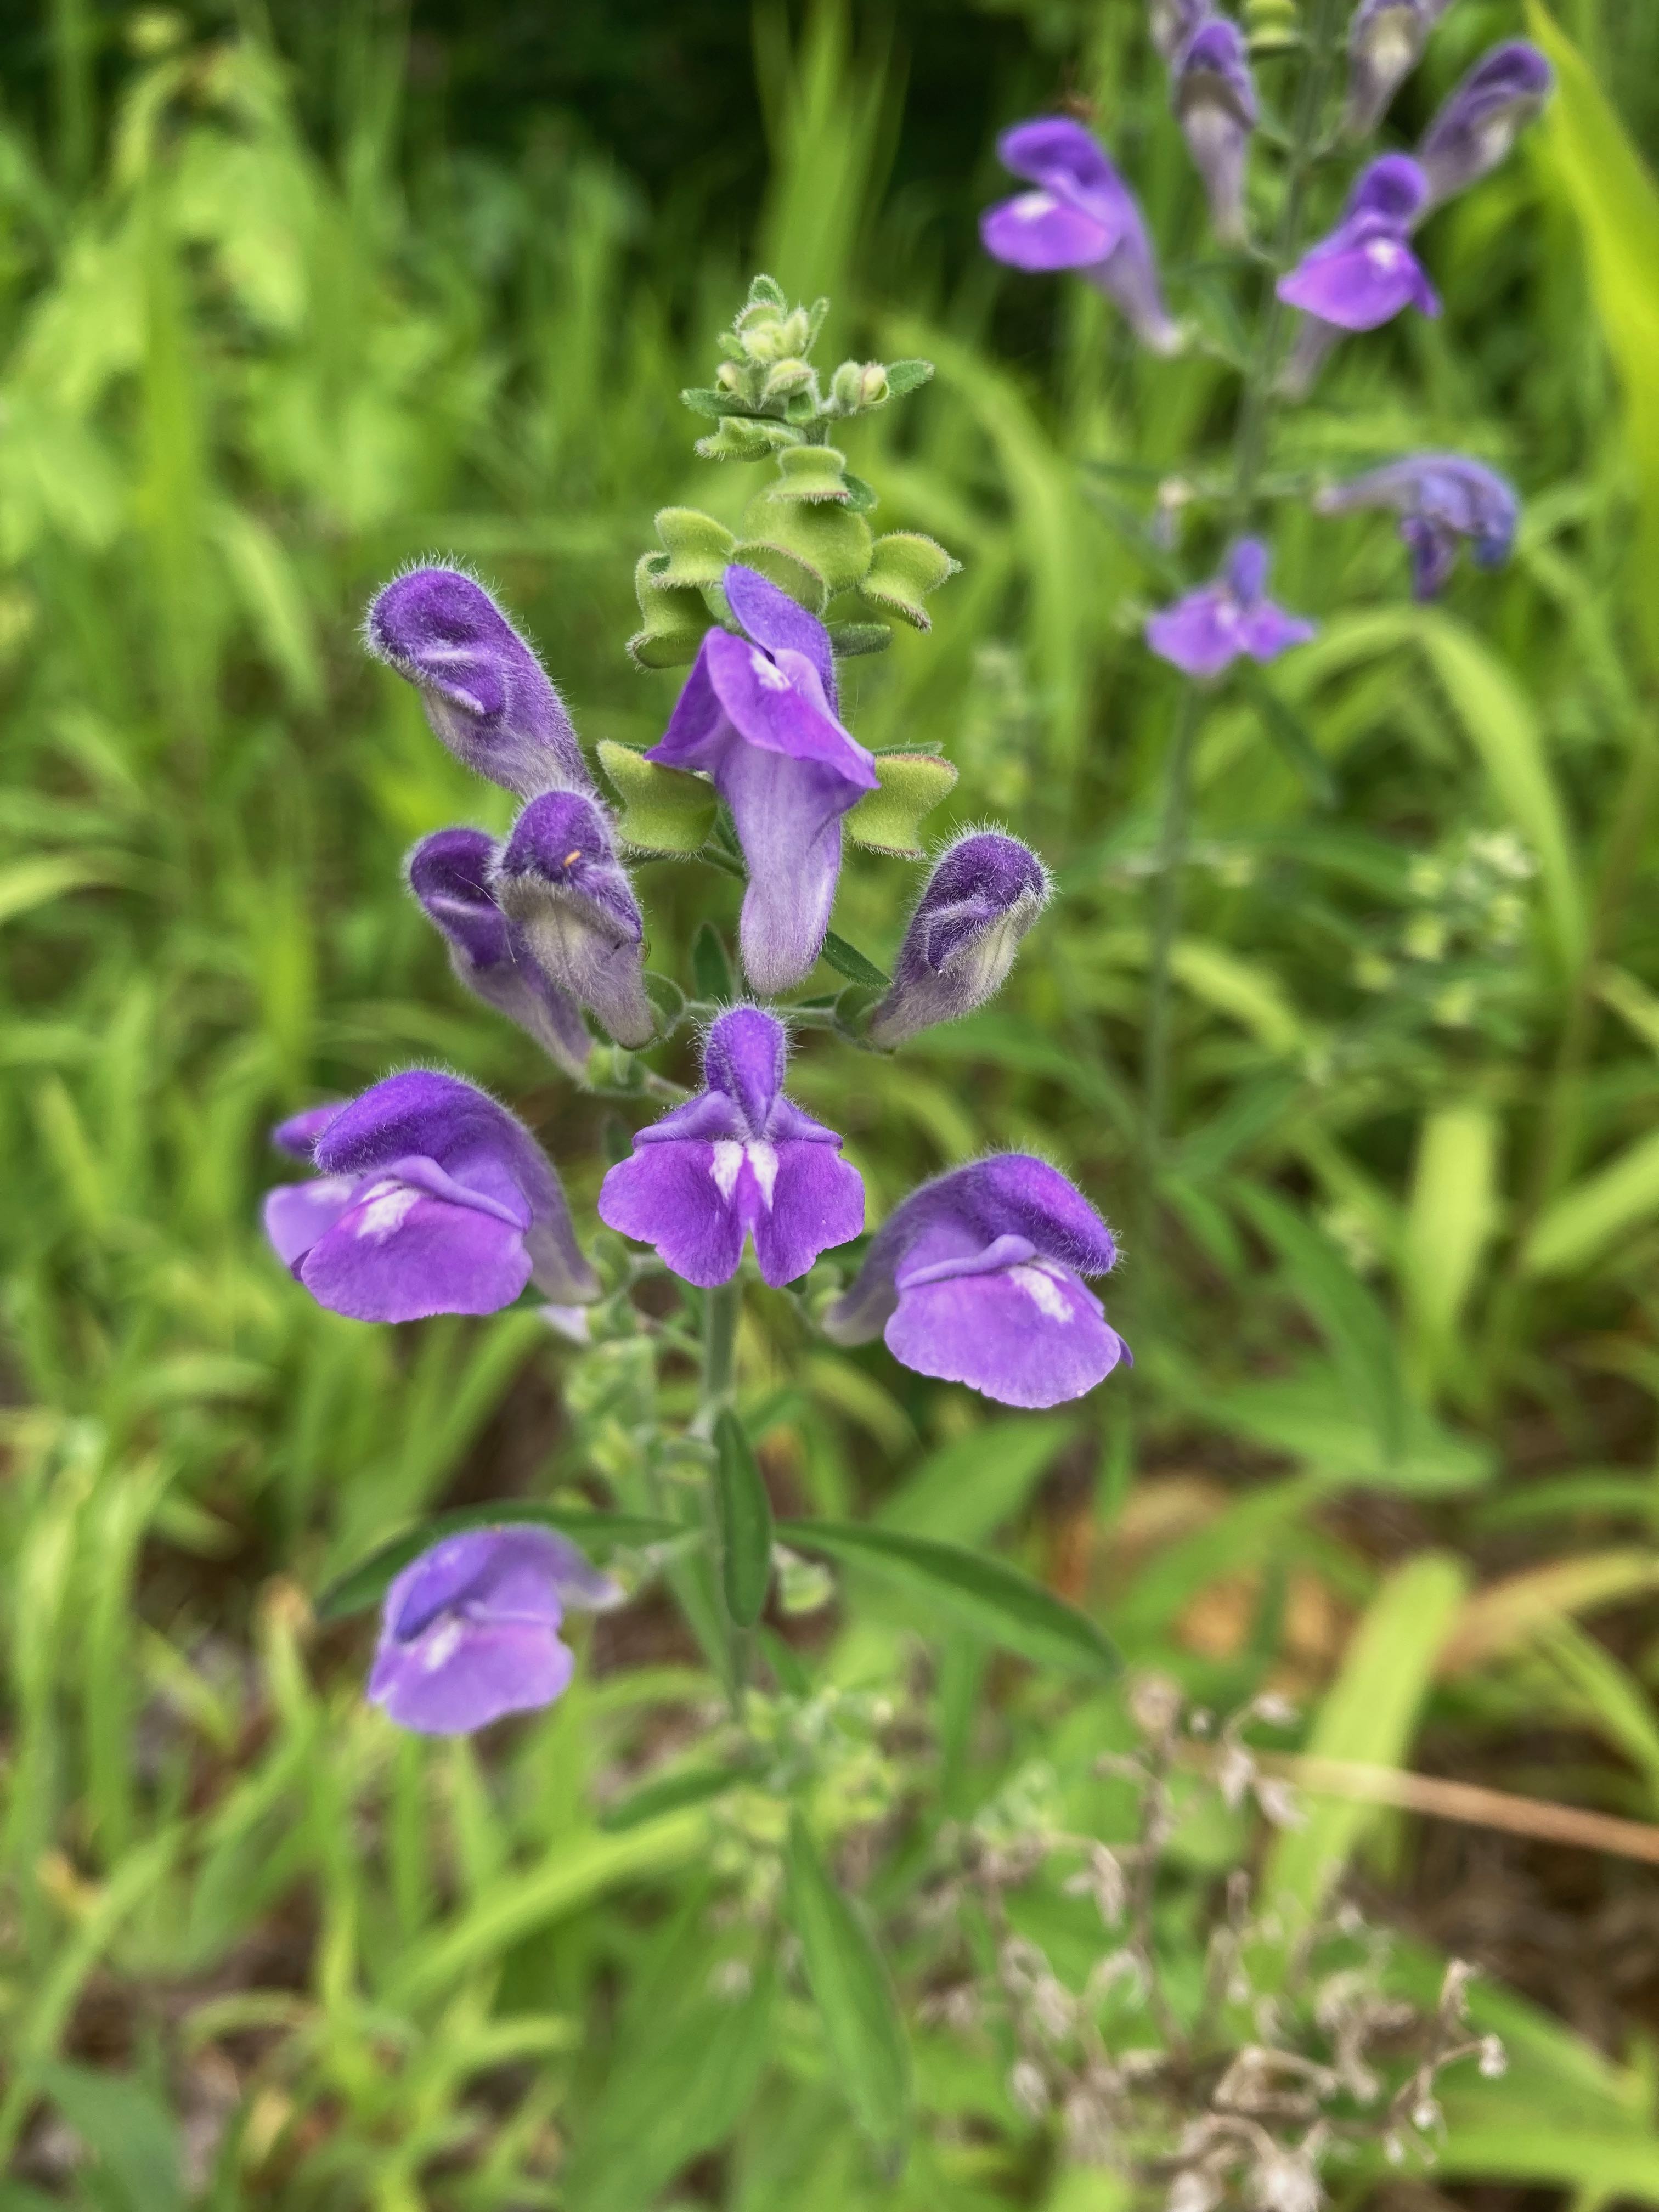 The Scientific Name is Scutellaria integrifolia. You will likely hear them called Narrowleaf Skullcap, Hyssop Skullcap, Helmet Skullcap, Helmet Flower. This picture shows the Flowers are purple/lavender with a hooded upper lip. of Scutellaria integrifolia